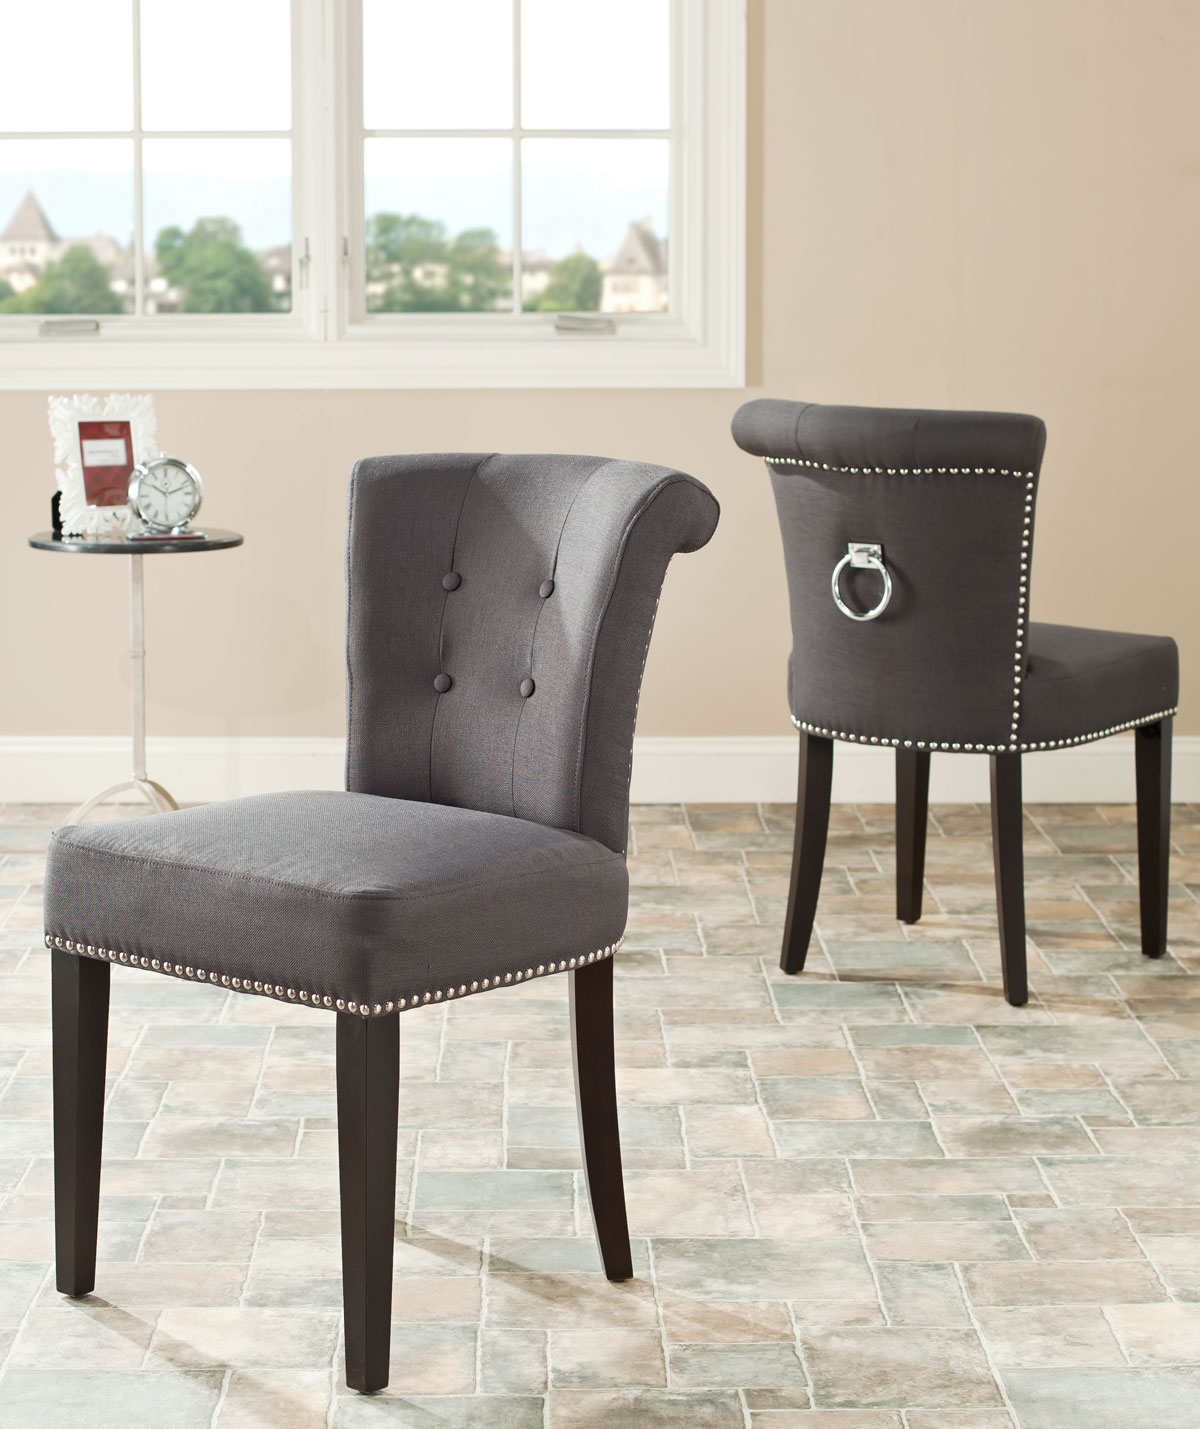 Sinclair 21''H Ring Chair (Set Of 2) - Silver Nail Heads - Charcoal/Espresso - Arlo Home - Image 1